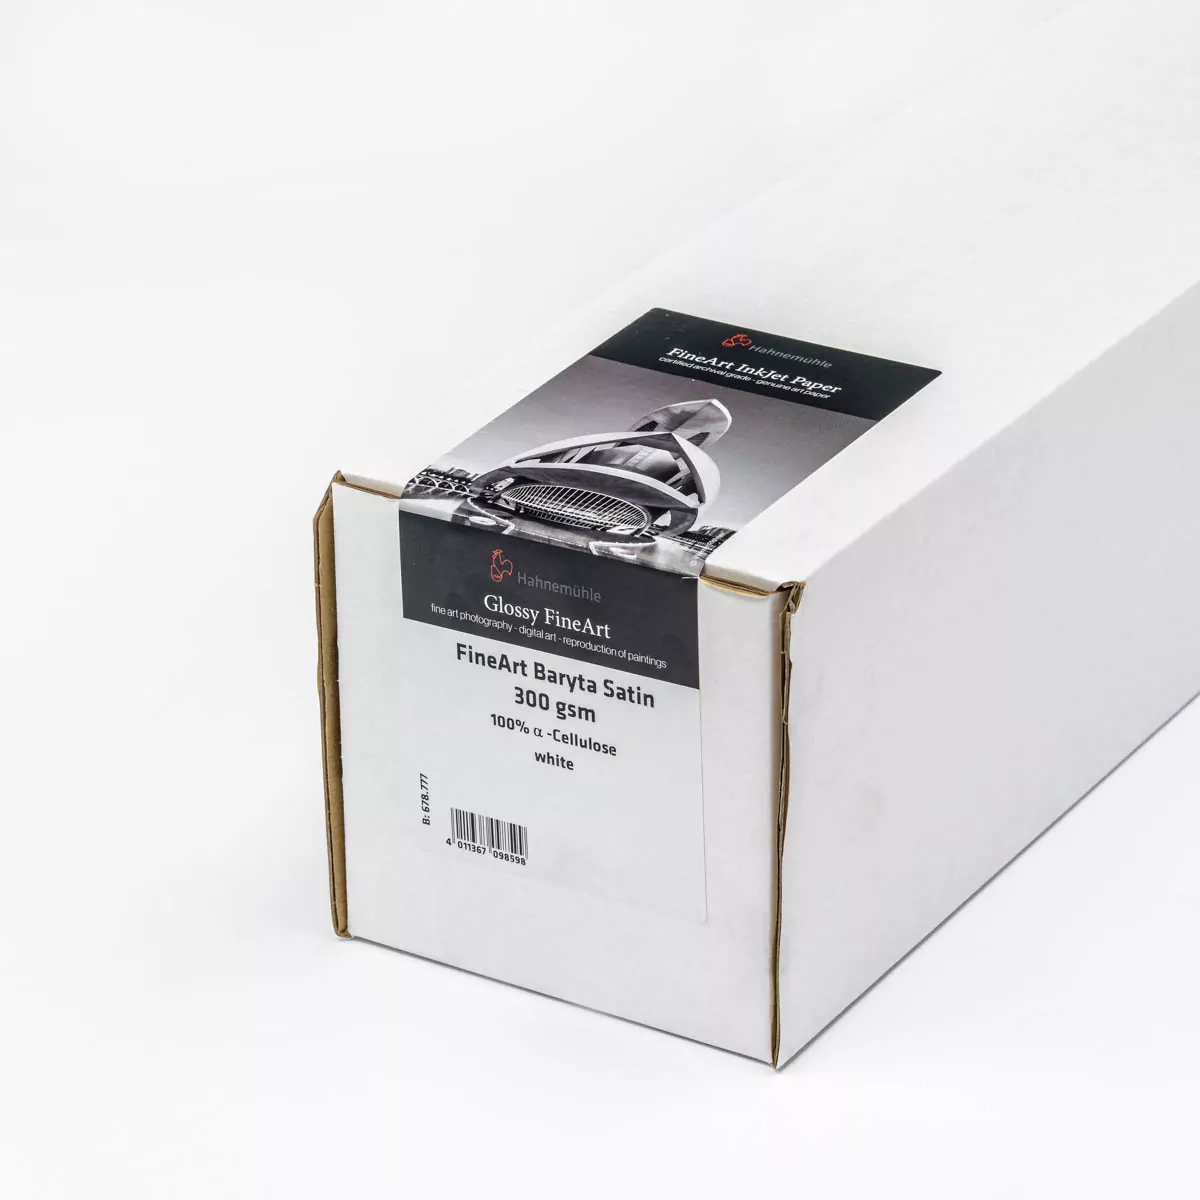 Hahnemuhle FineArt Baryta Satin 300gsm 36”(91cm)x12m roll